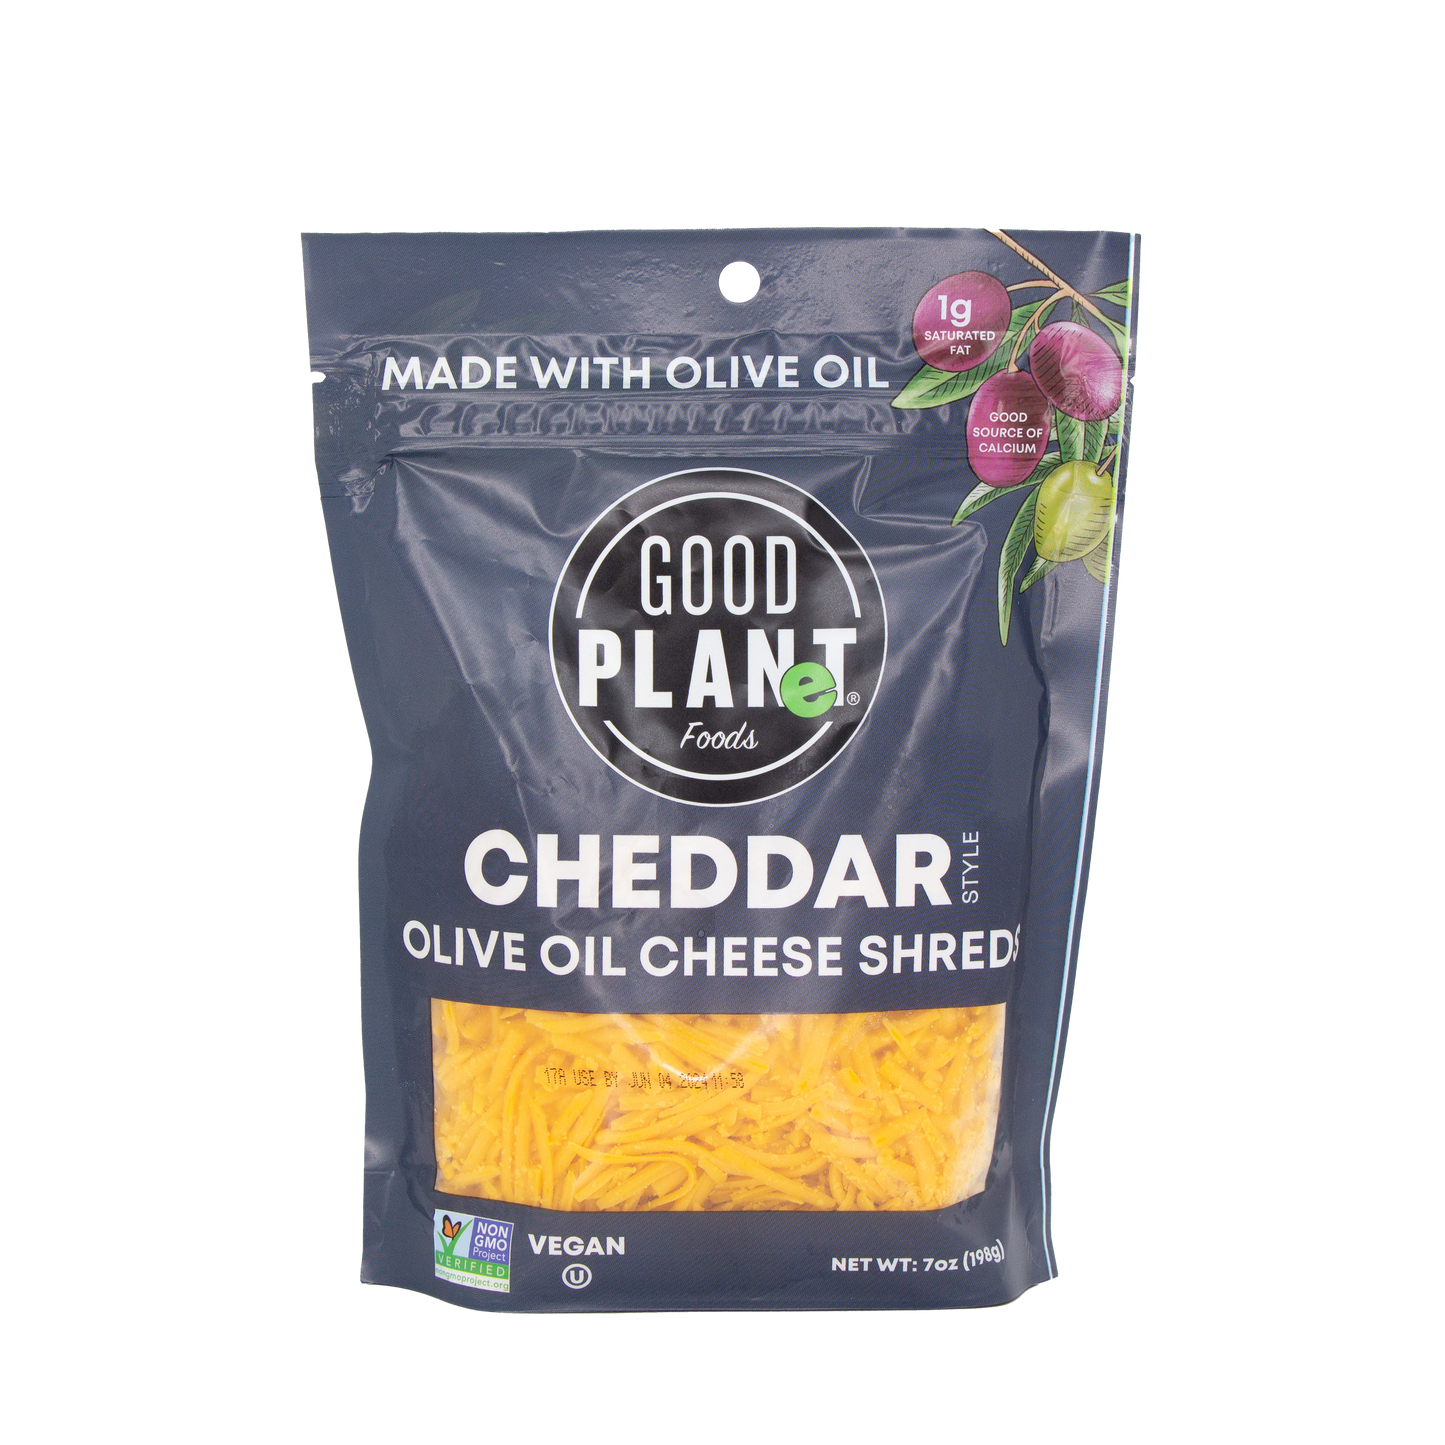 Good Planet - Cheddar Olive Oil Cheese Shreds (Store Pick-Up Only)